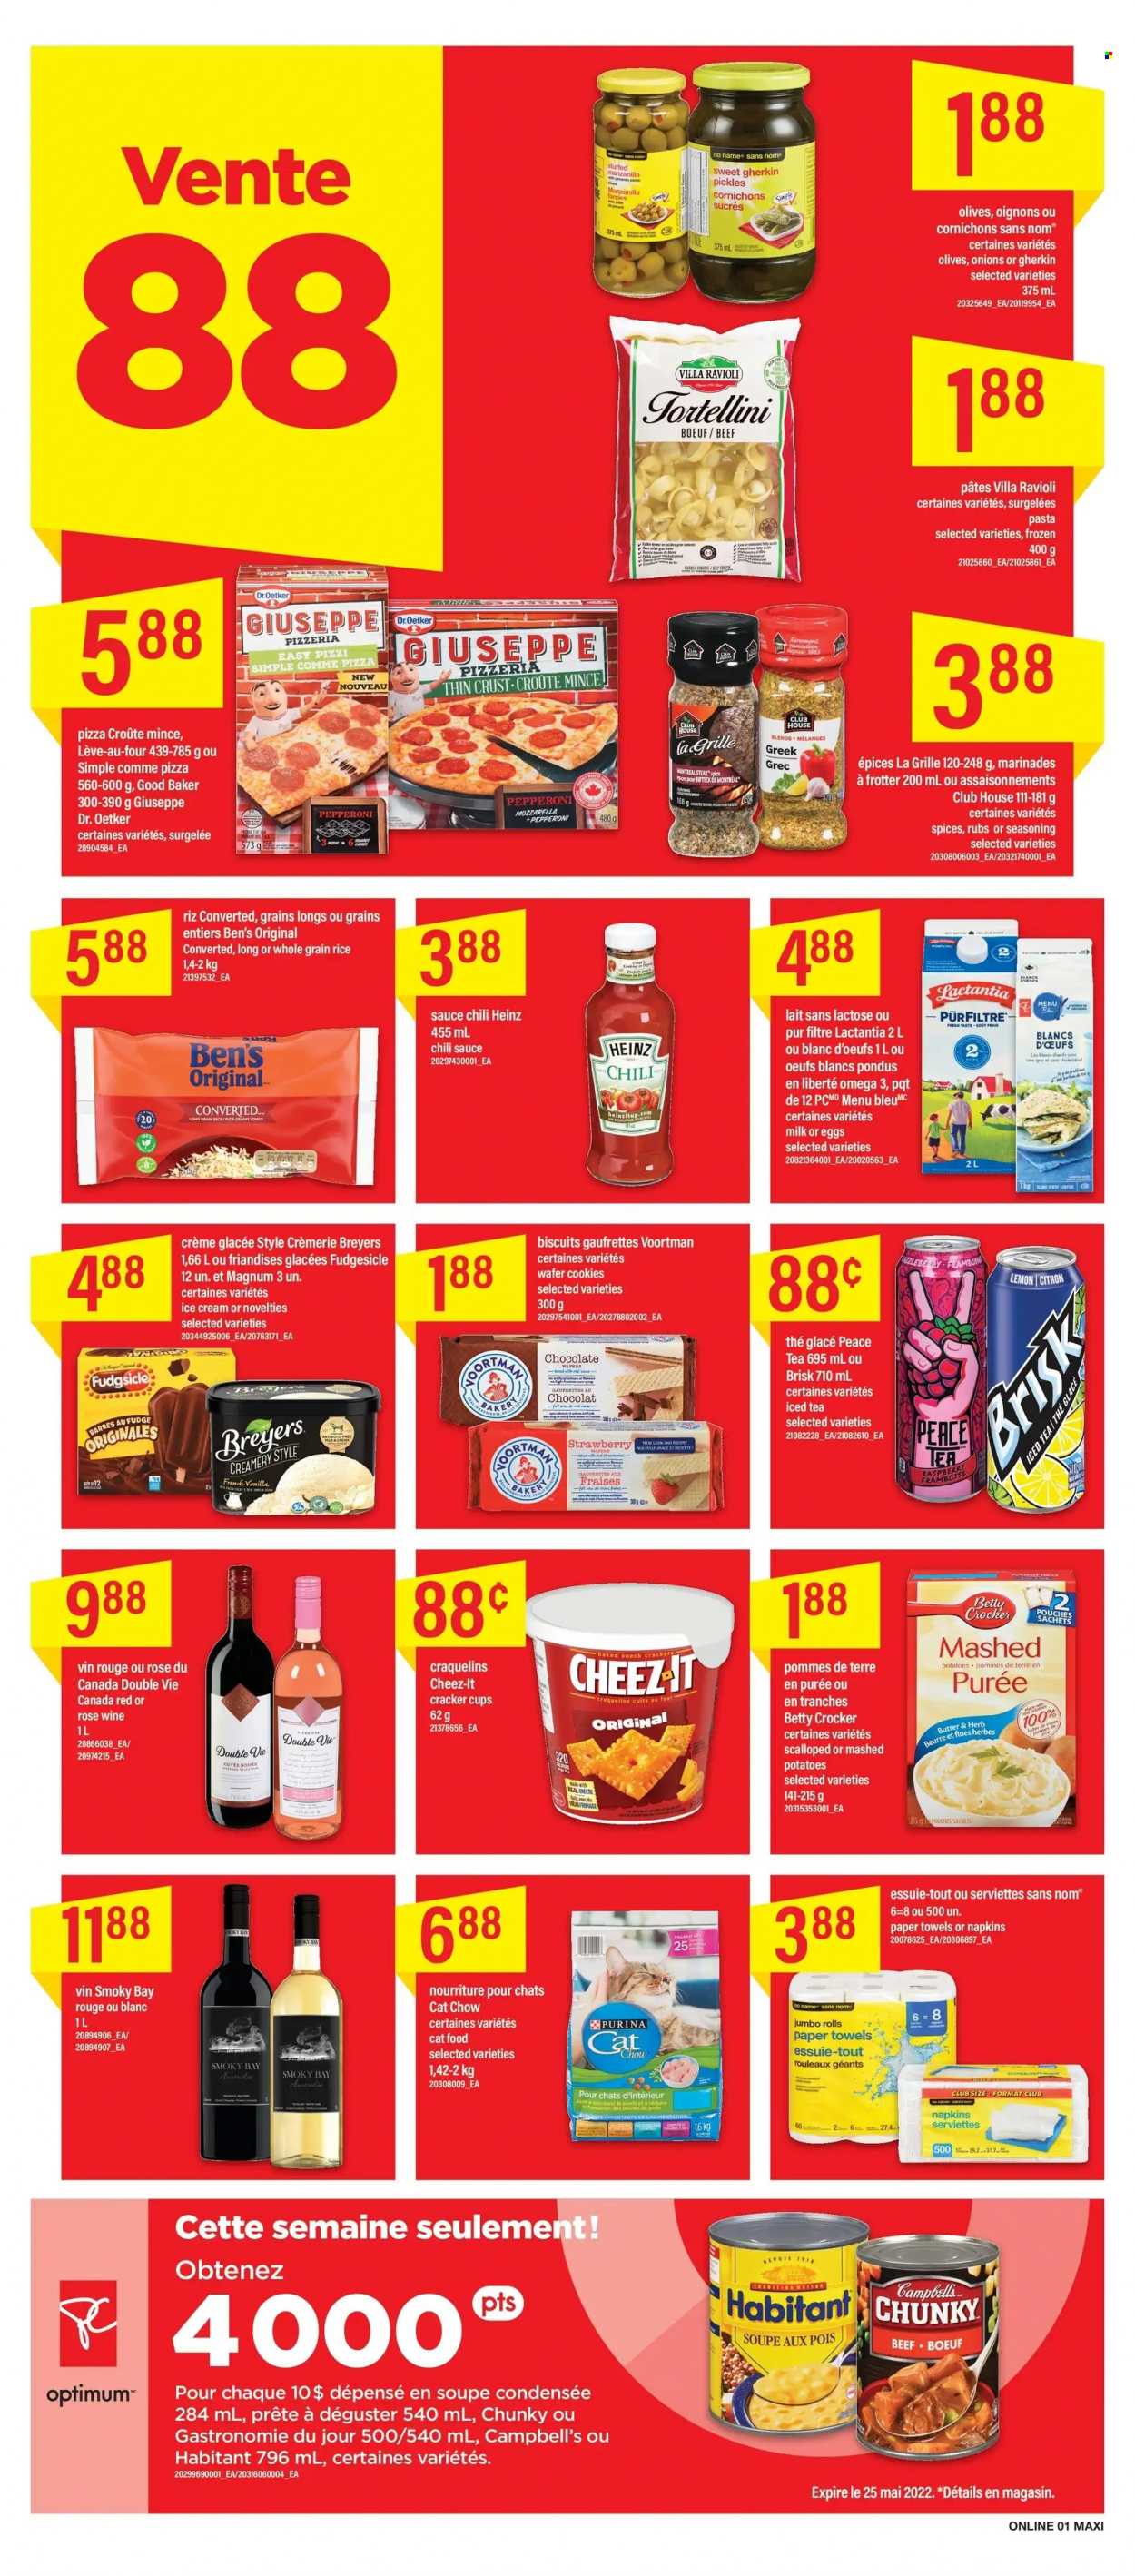 thumbnail - Maxi & Cie Flyer - May 19, 2022 - May 25, 2022 - Sales products - onion, No Name, Campbell's, mashed potatoes, ravioli, pizza, pasta, sauce, tortellini, pepperoni, Dr. Oetker, milk, eggs, butter, Magnum, ice cream, cookies, fudge, wafers, crackers, biscuit, Cheez-It, pickles, rice, whole grain rice, spice, chilli sauce, ice tea, Cuvée, rosé wine, napkins, kitchen towels, paper towels, Omega-3, Heinz, olives, steak. Page 6.